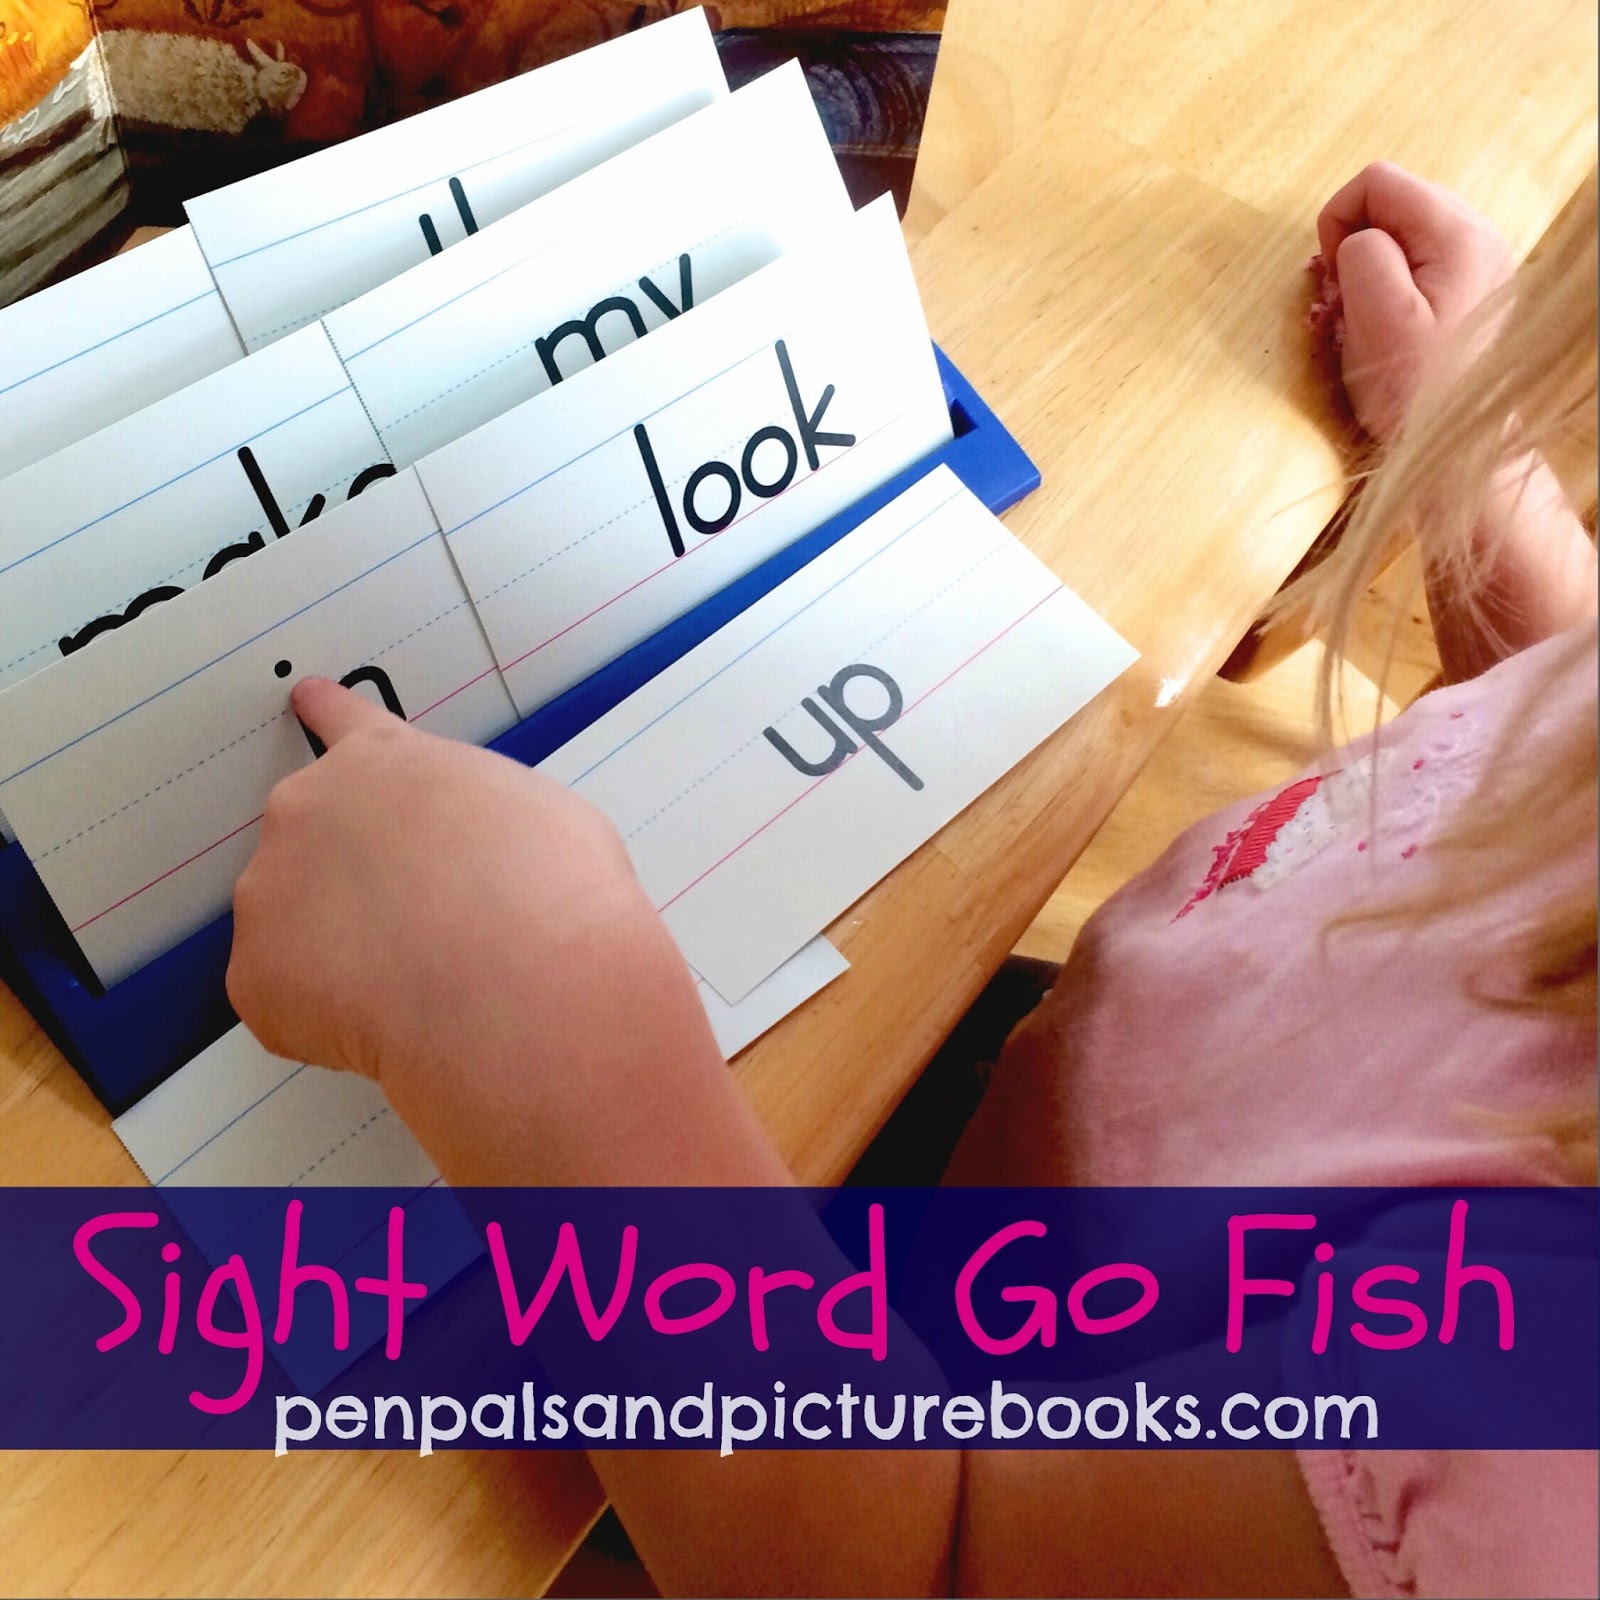 fish Go go Sight Fish Word sight Picture word  Pals Books: & Pen